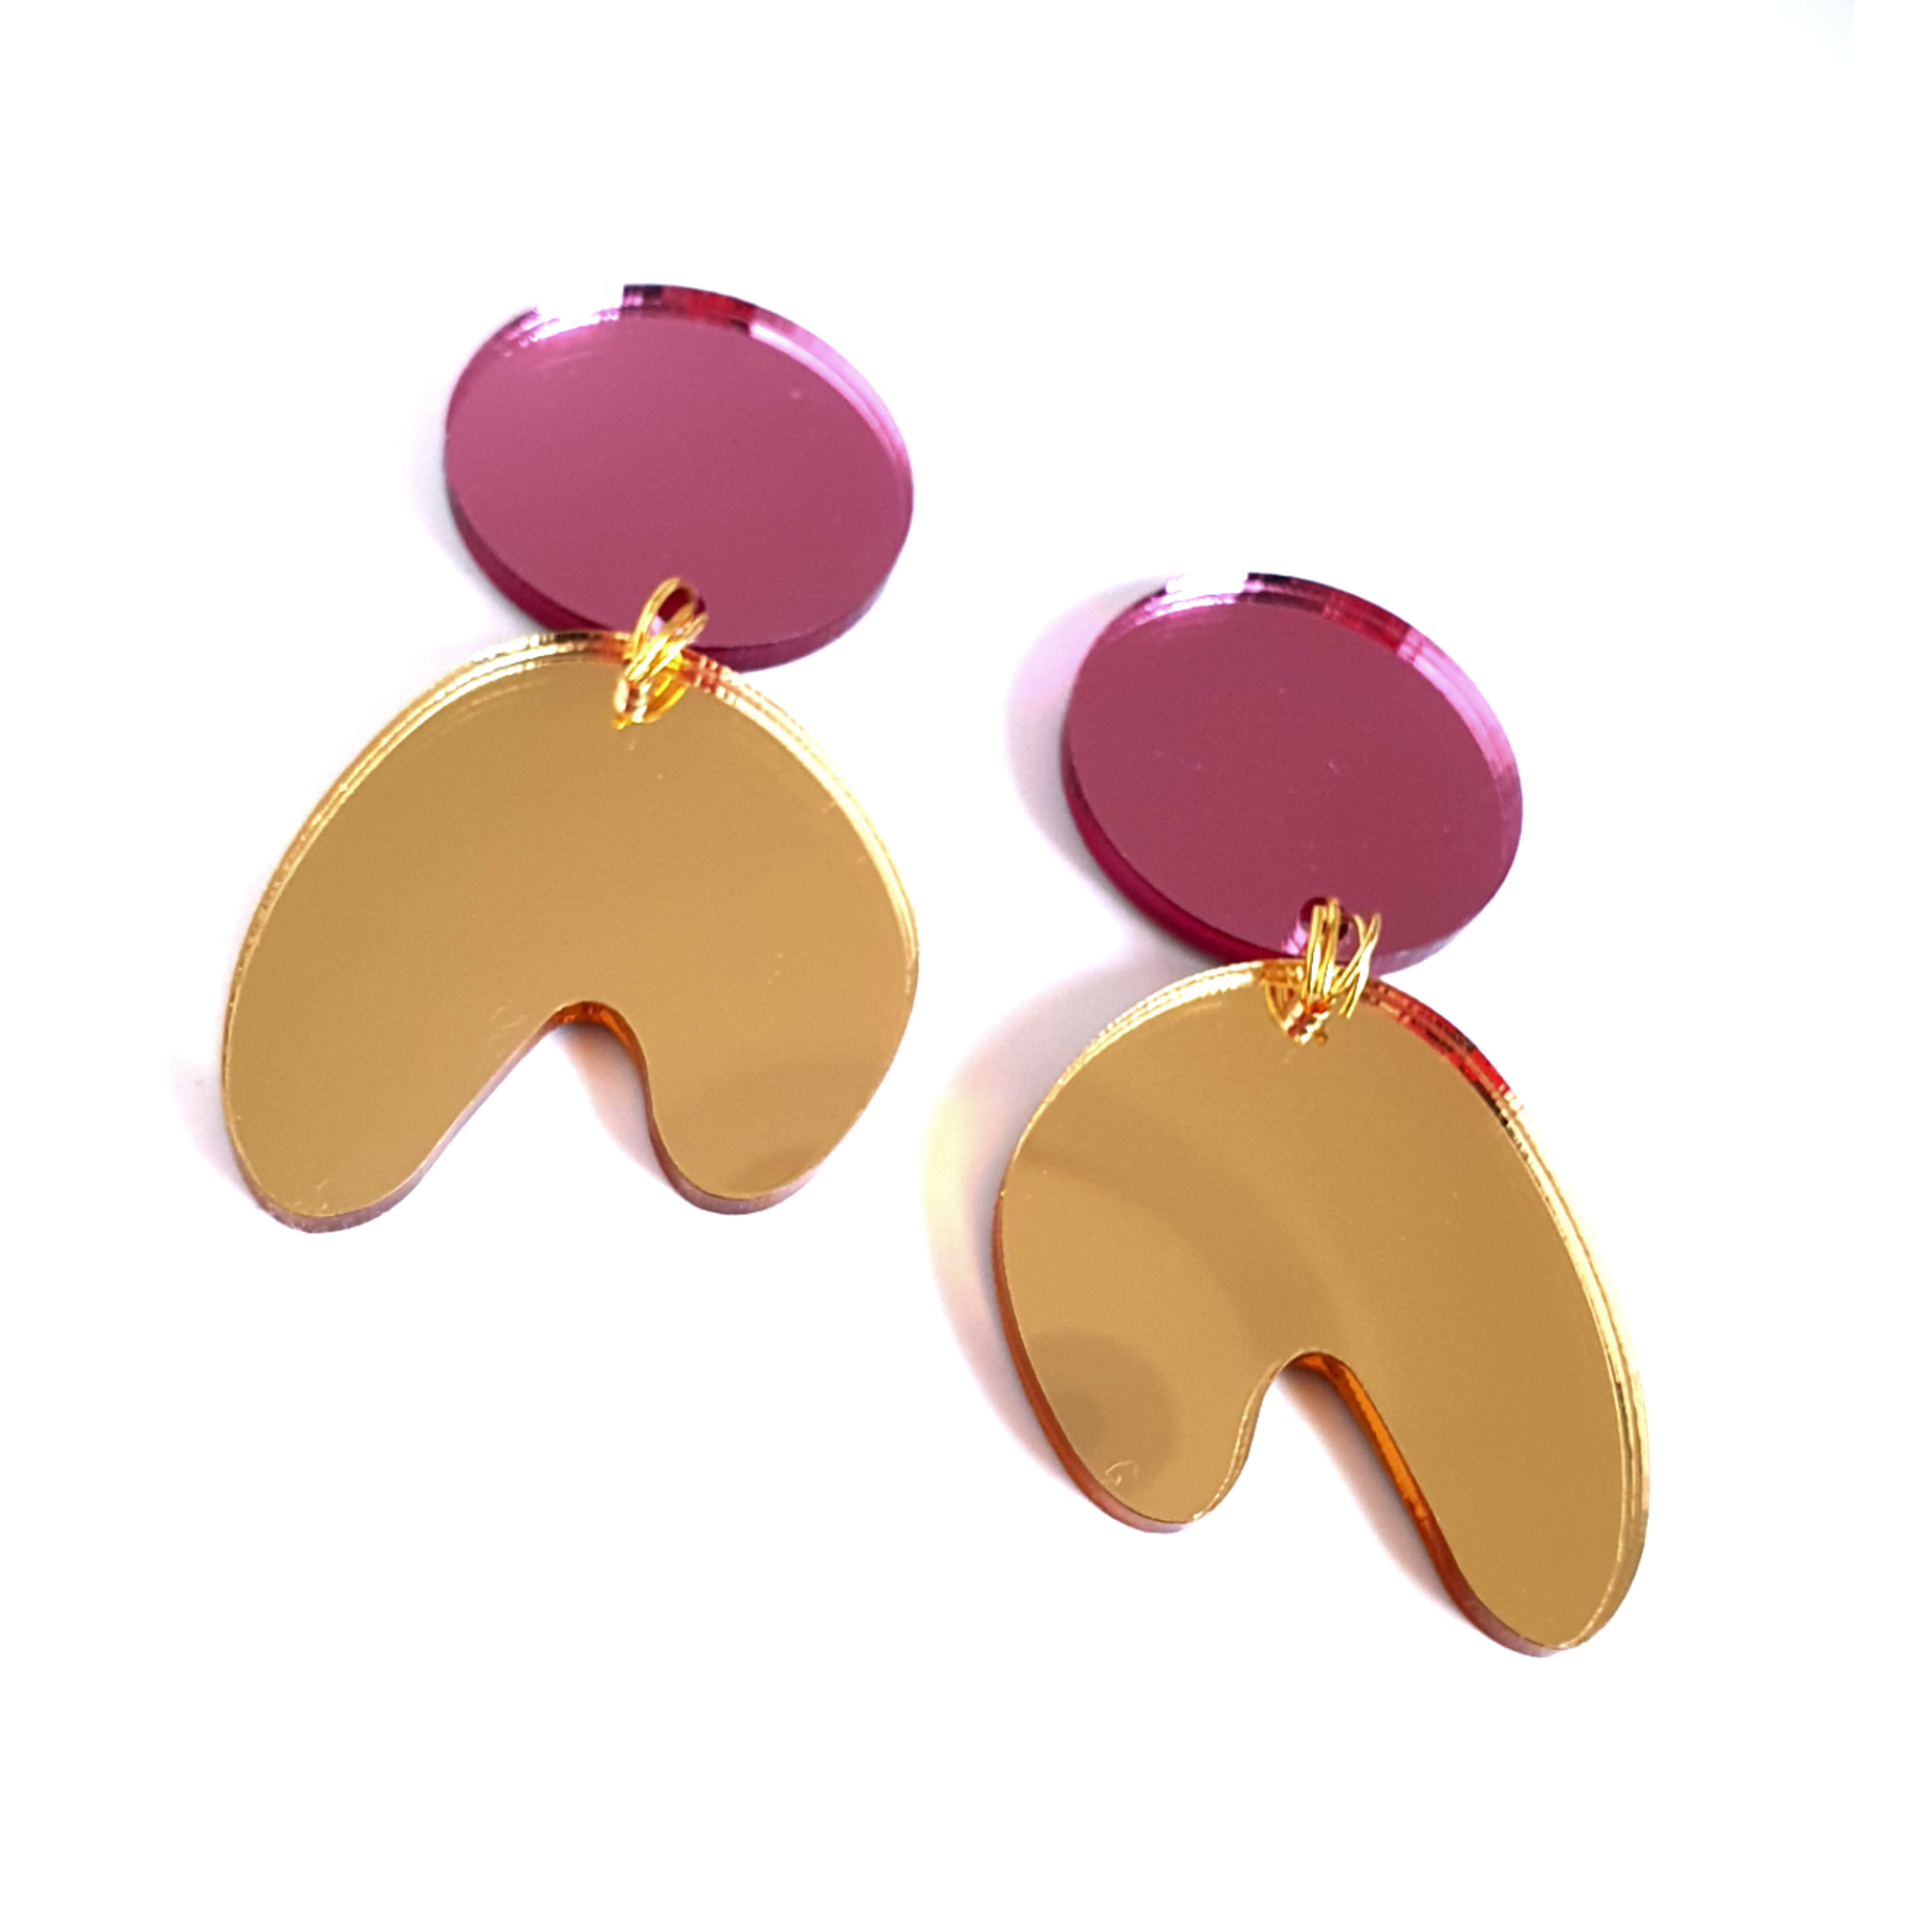 eve ray 'snobby party princess' earrings